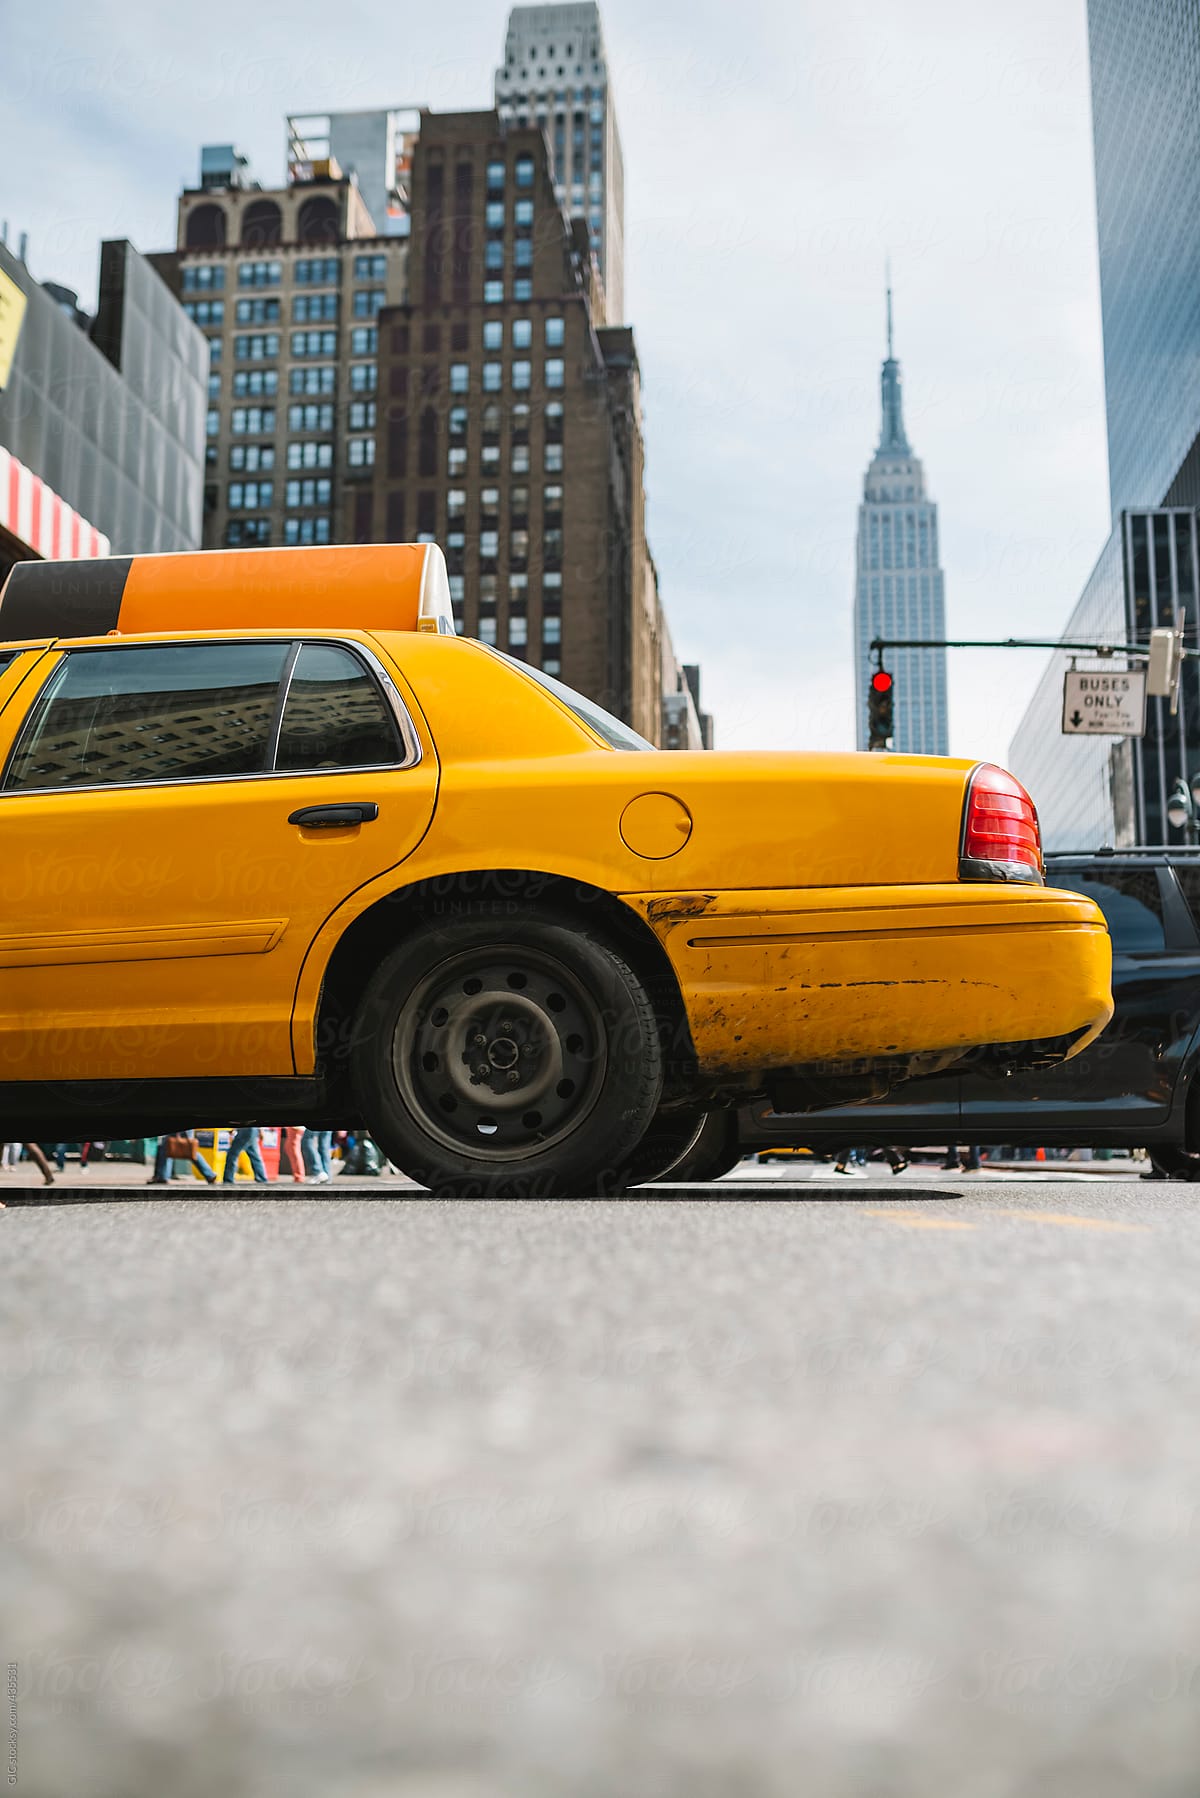 Yellow Cab in Manhattan against Empire State Building